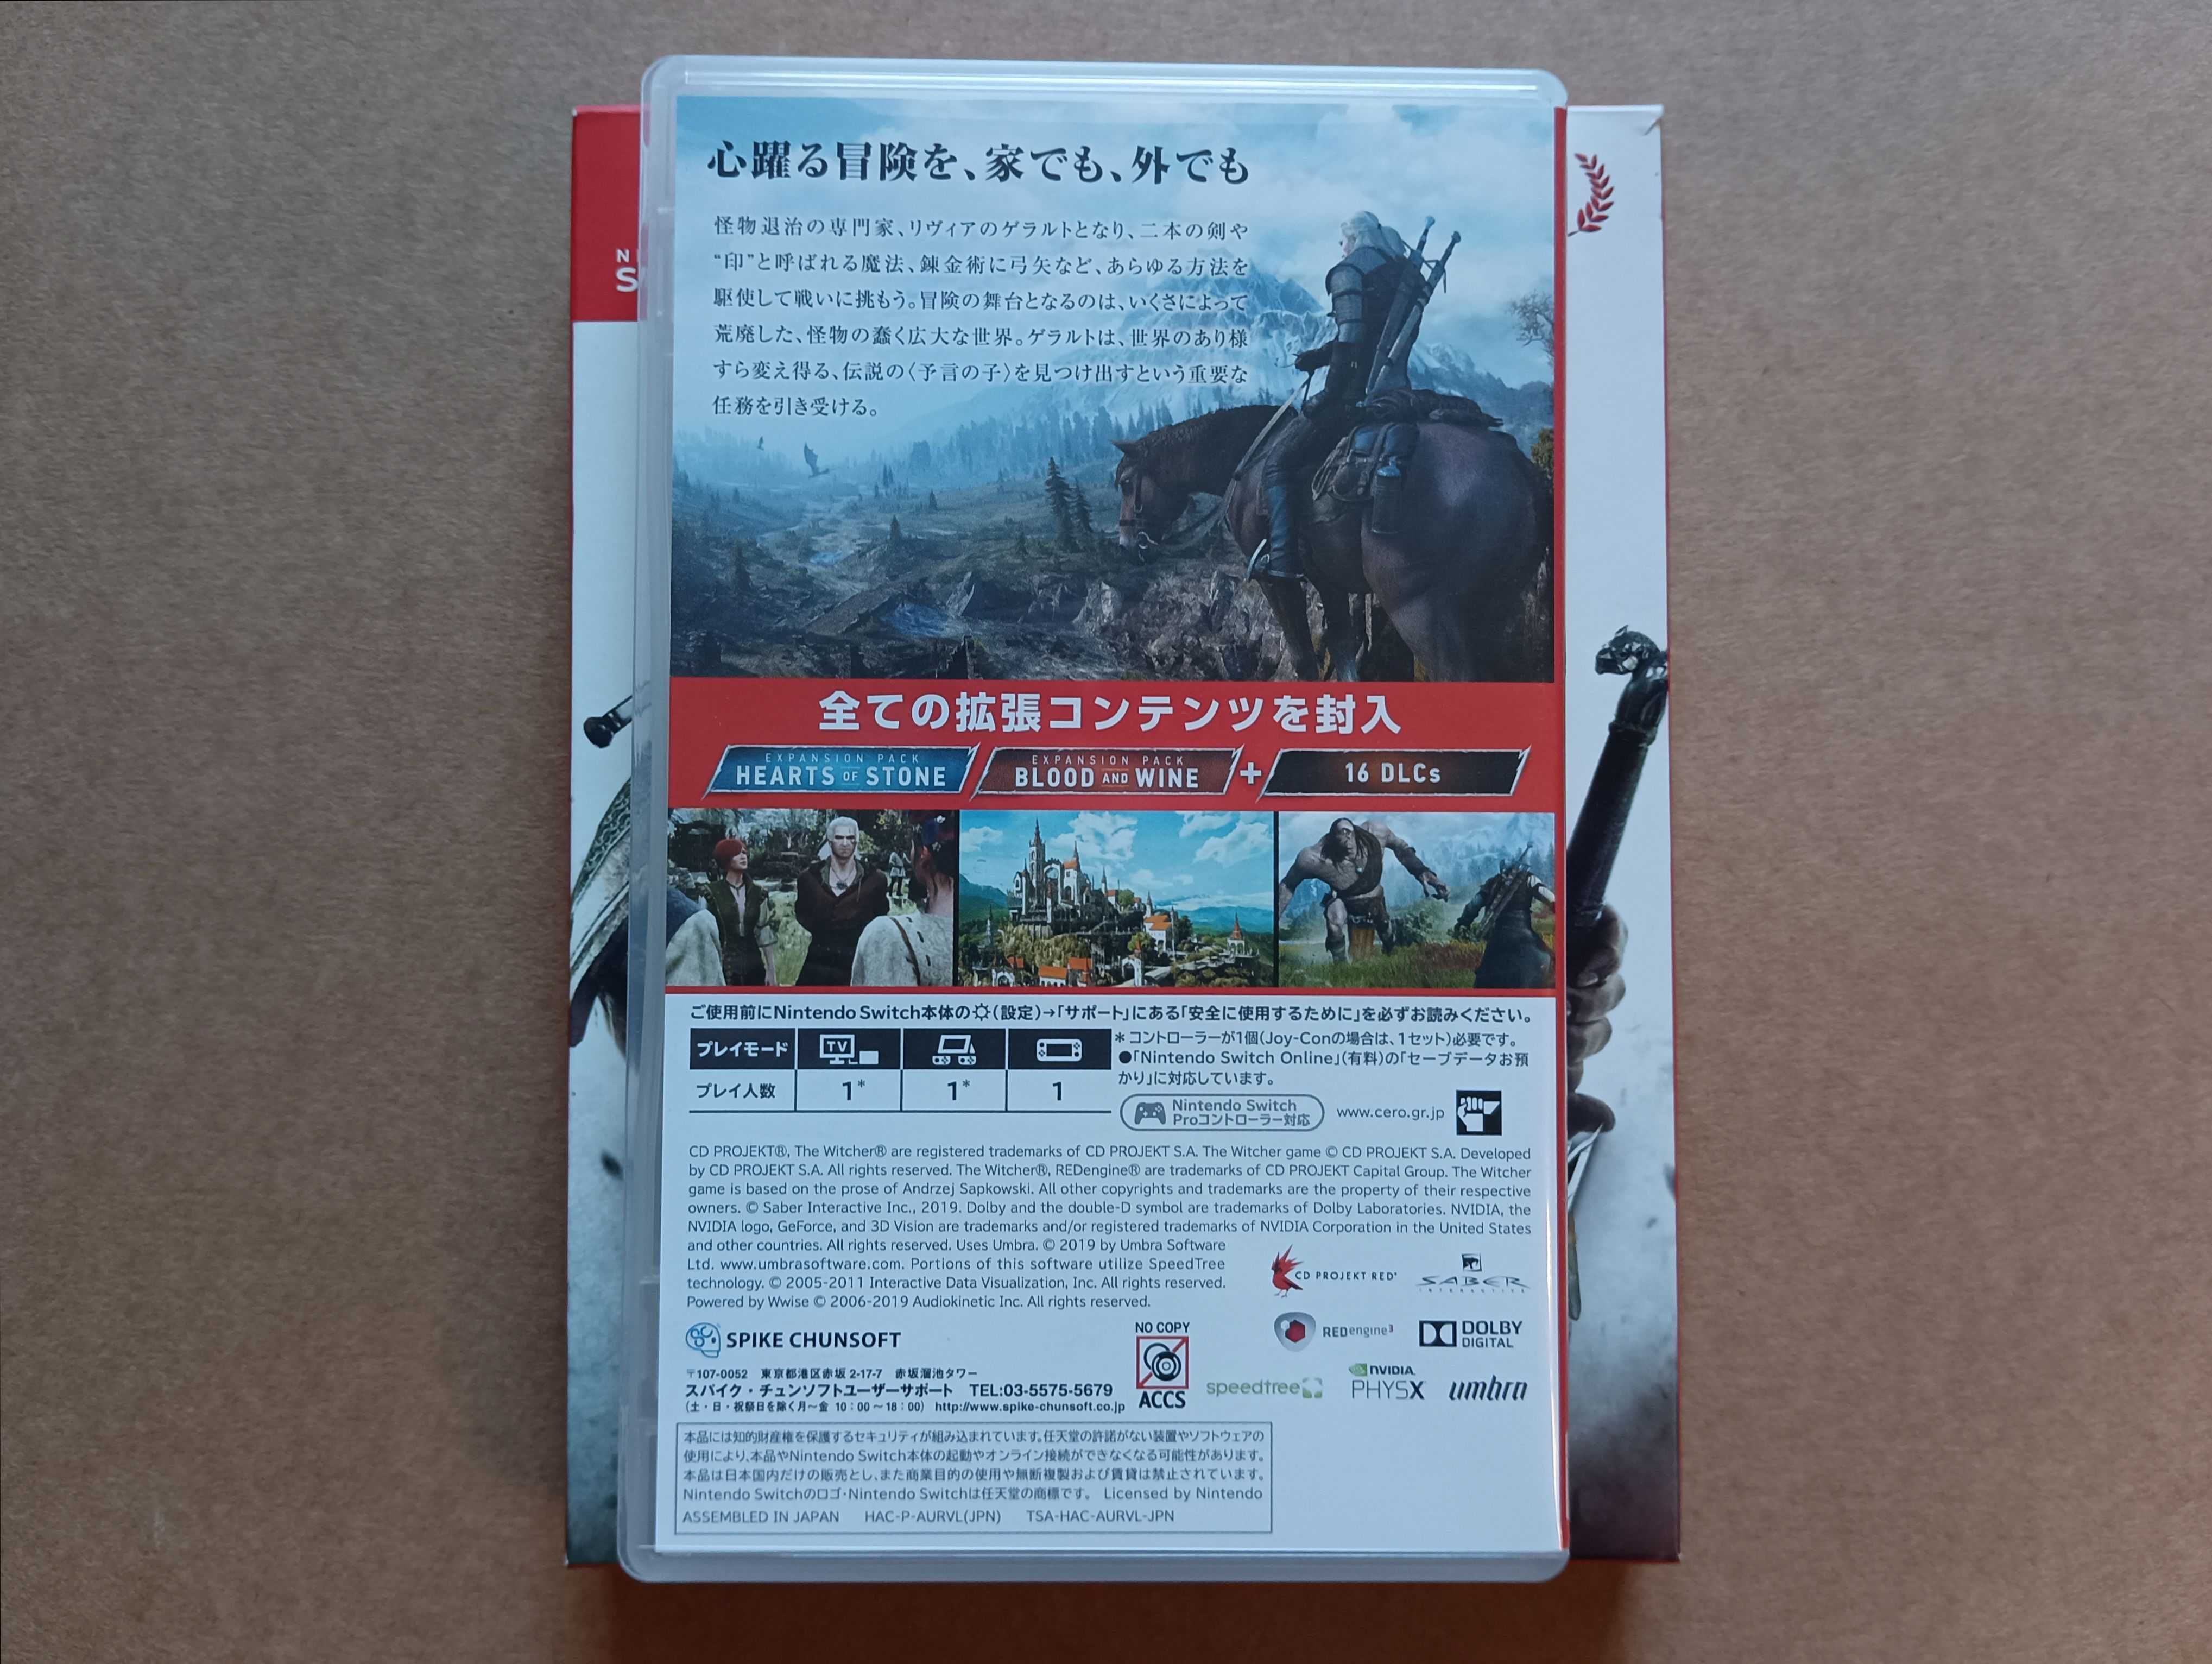 Witcher 3 Wild Hunt Complete Edition Nintendo Switch